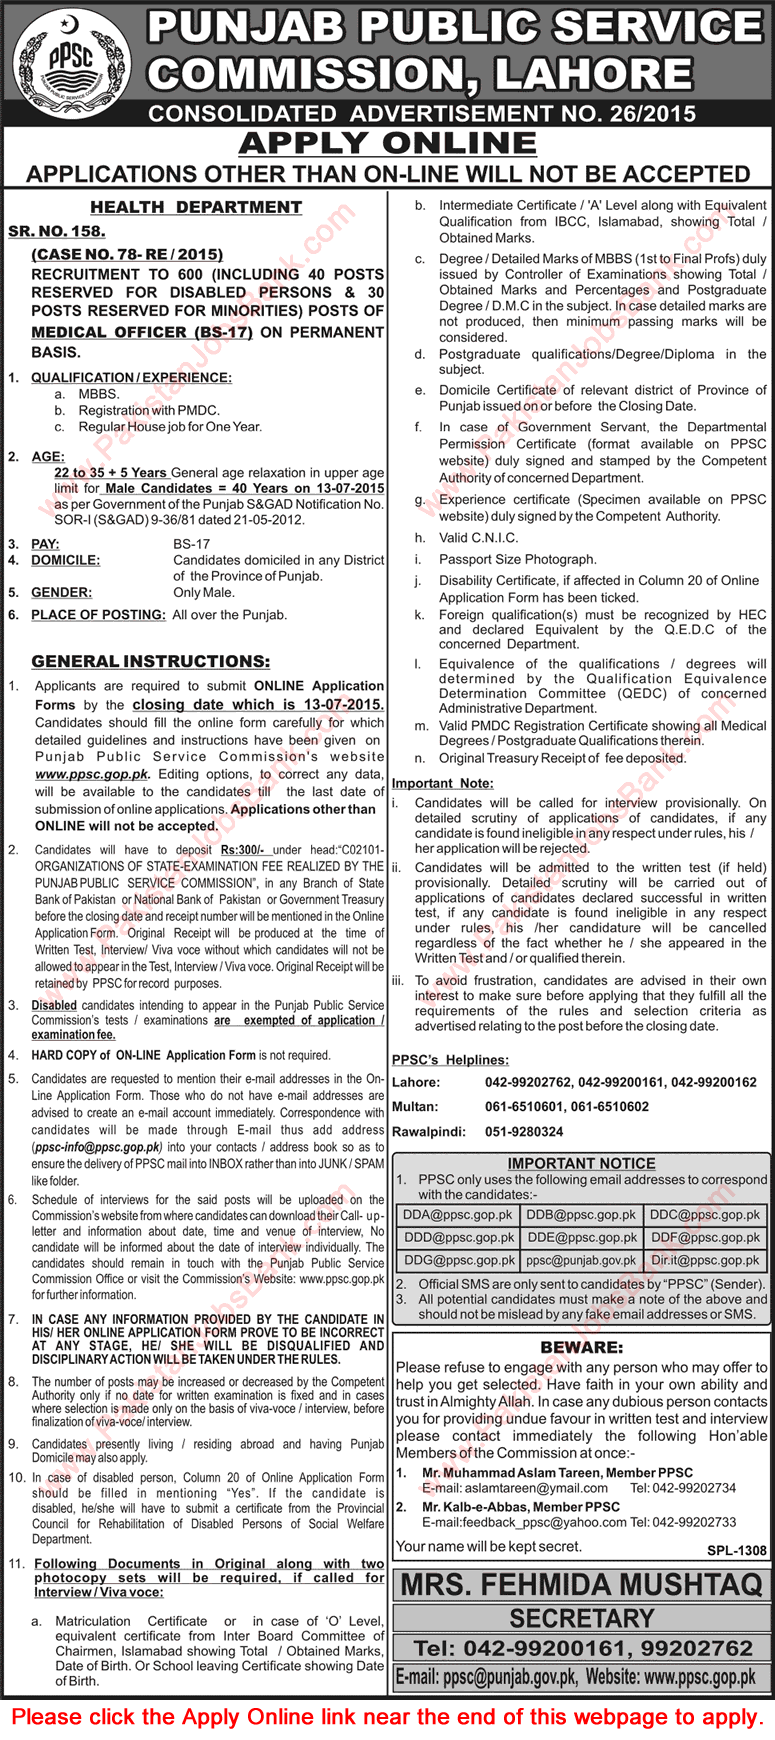 PPSC Jobs June 2015 July Apply Online Consolidated Advertisement No 26/2015 Latest / New